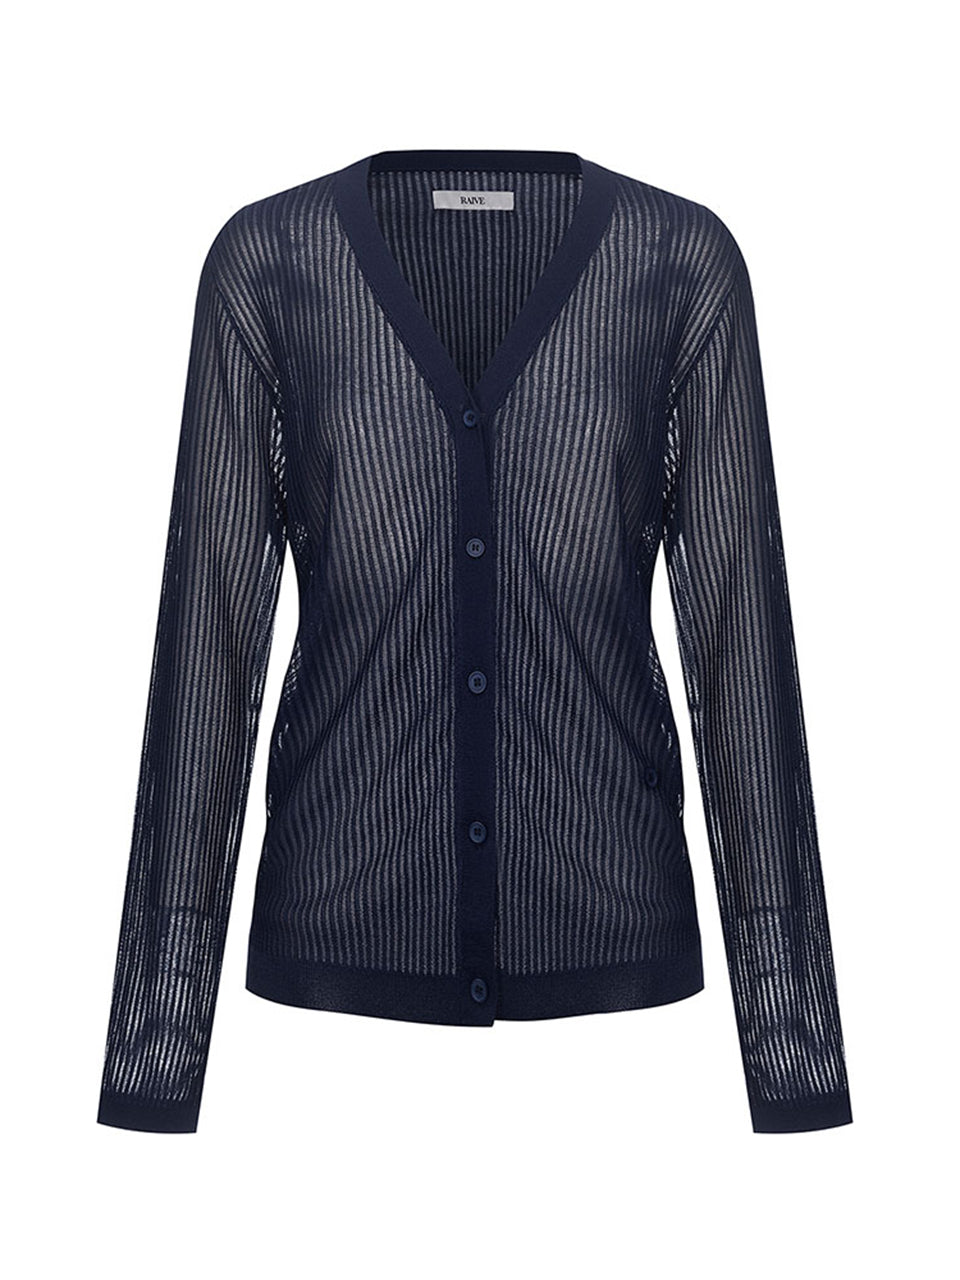 See-through Knit Cardigan in Navy